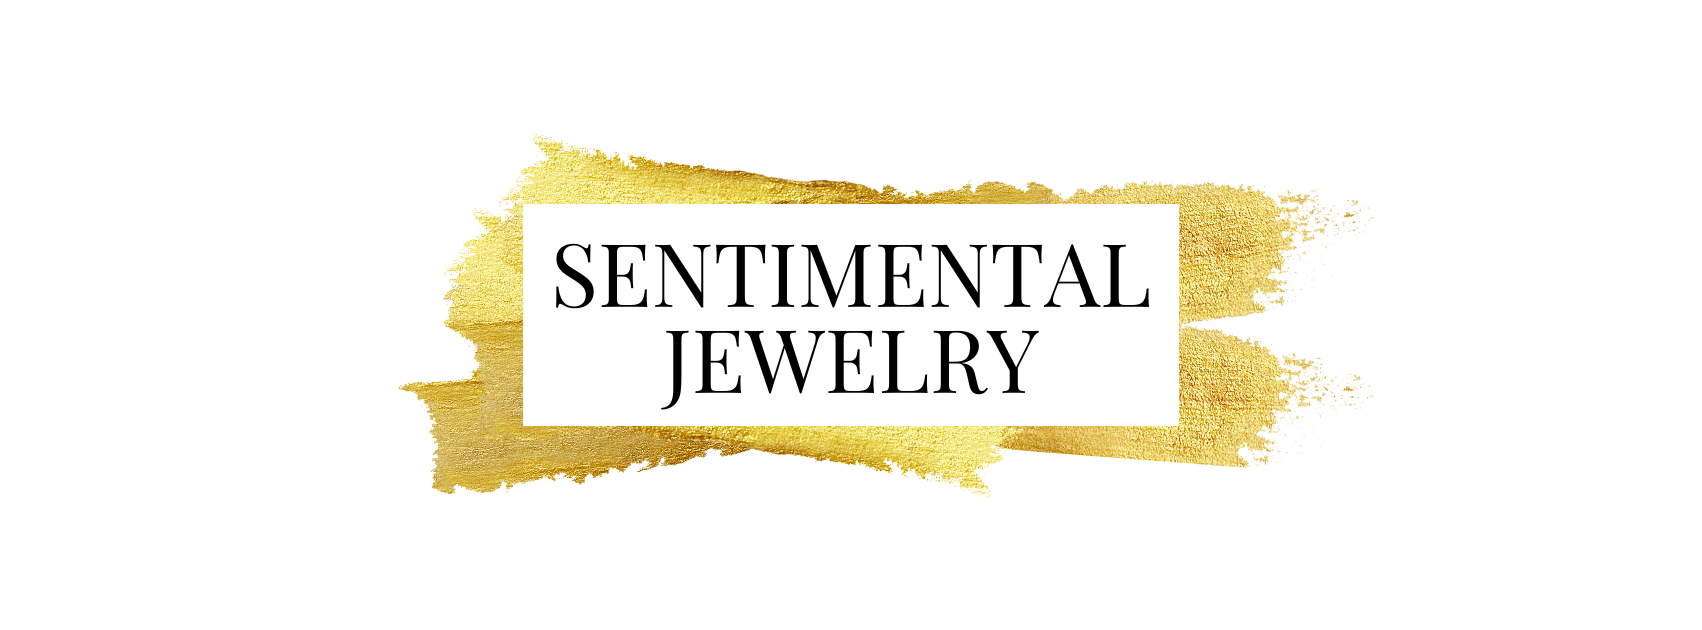 Liliana & Liam's sentimental jewelry is perfect gift for Christmas, Valentine's, Mother's Day, Father's Day, or Birthday.  Your mom, mother in law, daughter, daughter in law, sister, sister in law, aunt, niece, cousin, grandma or friend will love it! 